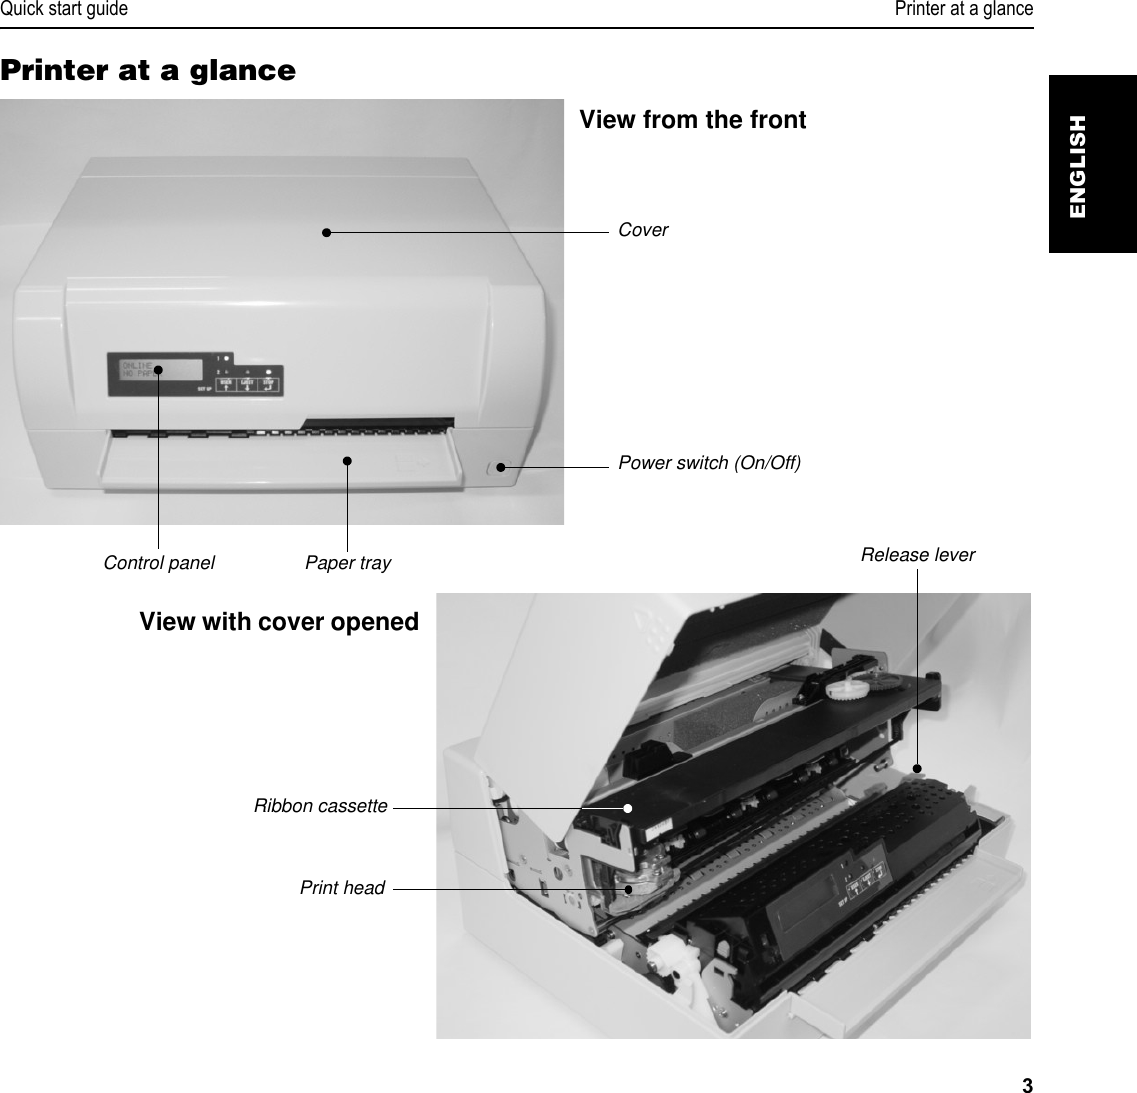 Quick start guide Printer at a glance3ENGLISHPrinter at a glanceCoverPower switch (On/Off)Paper trayControl panelRibbon cassettePrint headRelease leverView from the frontView with cover opened